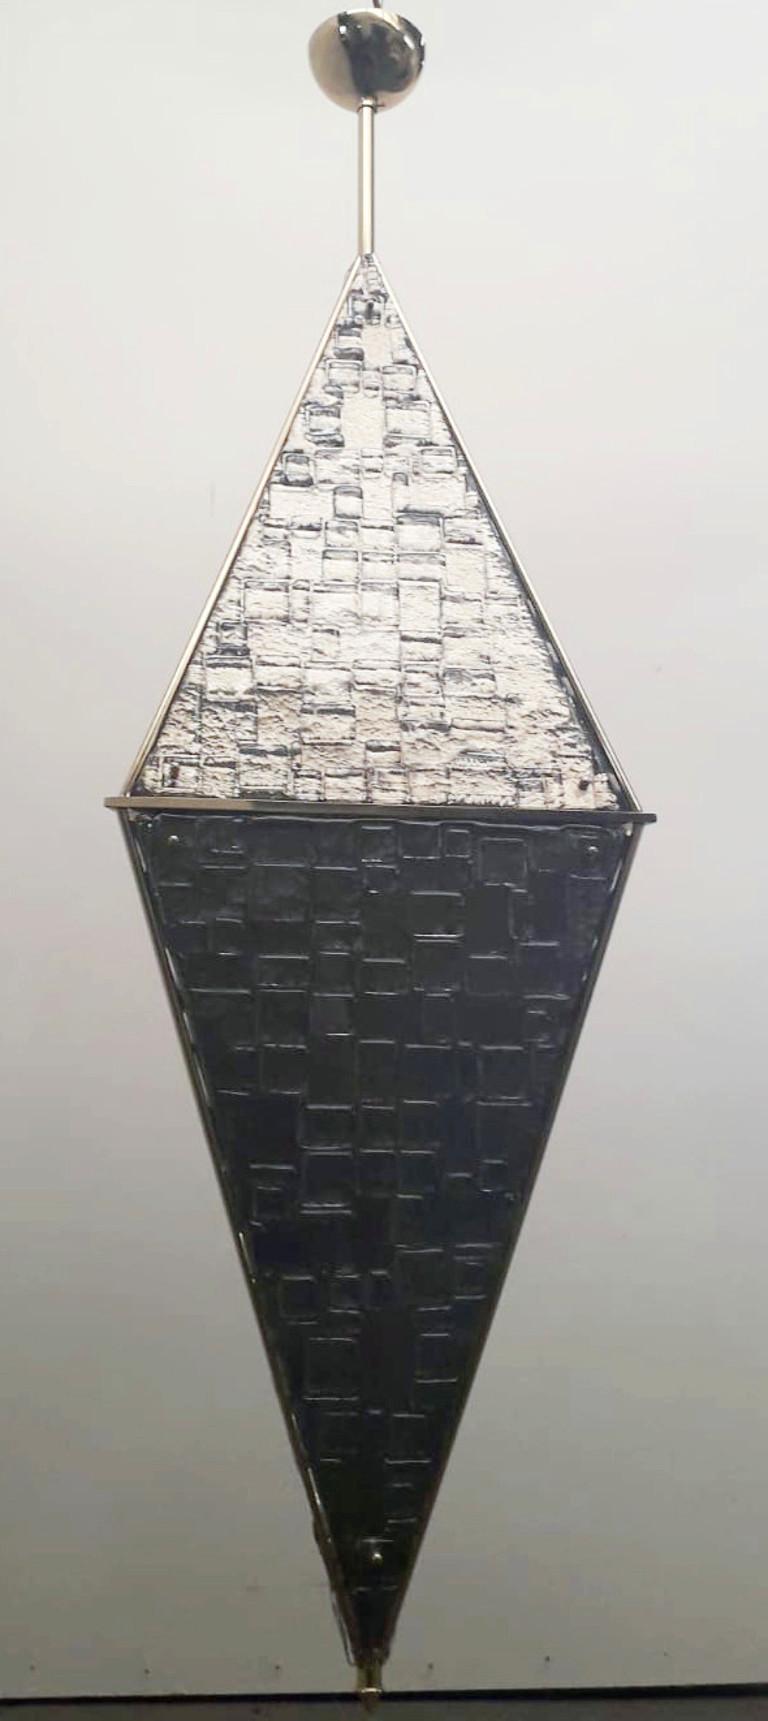 Limited edition Italian lantern with silvered triangular textured Murano glass, mounted on polished brass metal finish frame / Exclusively designed by Gianluca Fontana for Fabio Ltd / Made in Italy
12 lights / E12 or E14 type / max 40W each
Total